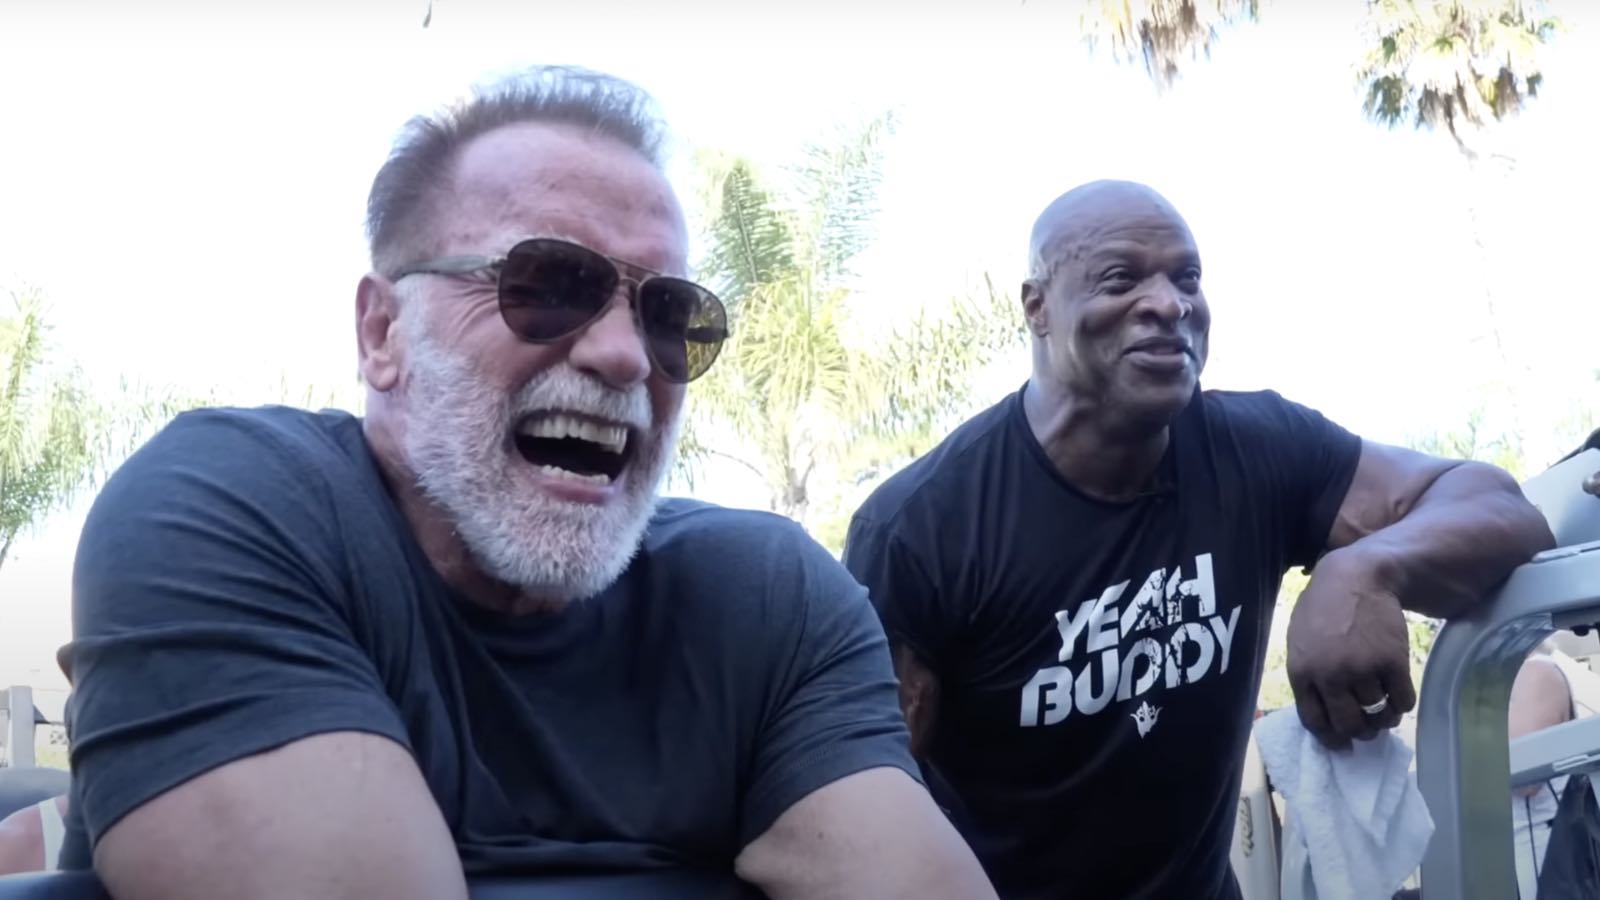 arnold-schwarzenegger-and-ronnie-coleman-train-together-at-gold's-gym-–-breaking-muscle